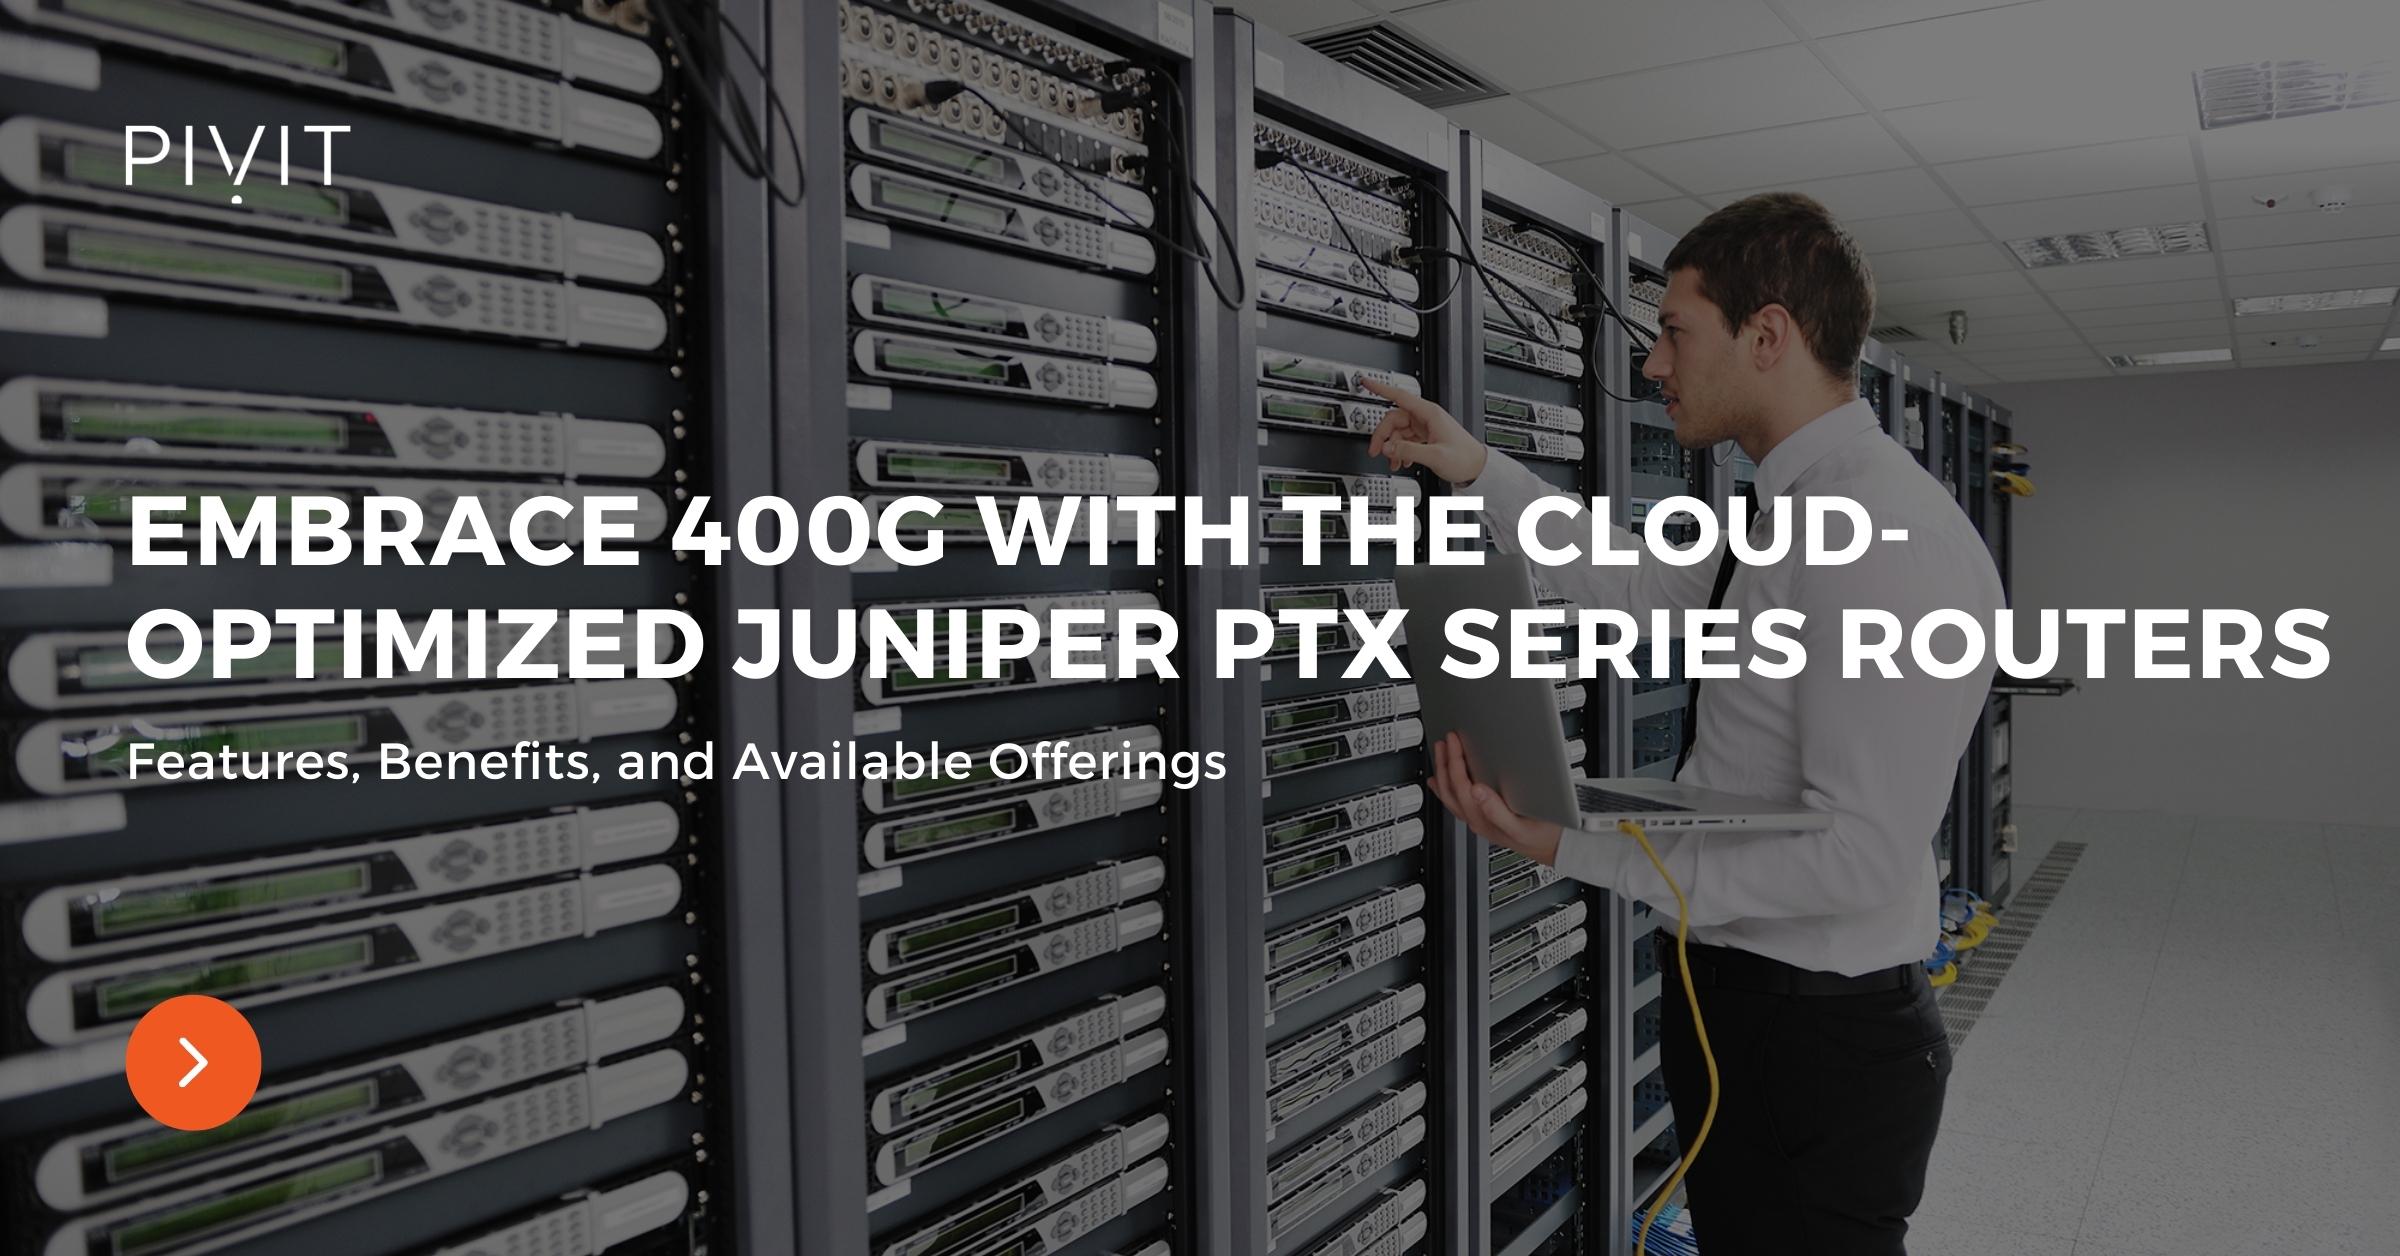 Embrace 400G With the Cloud-Optimized Juniper PTX Series Routers - Features, Benefits, and Available Offerings